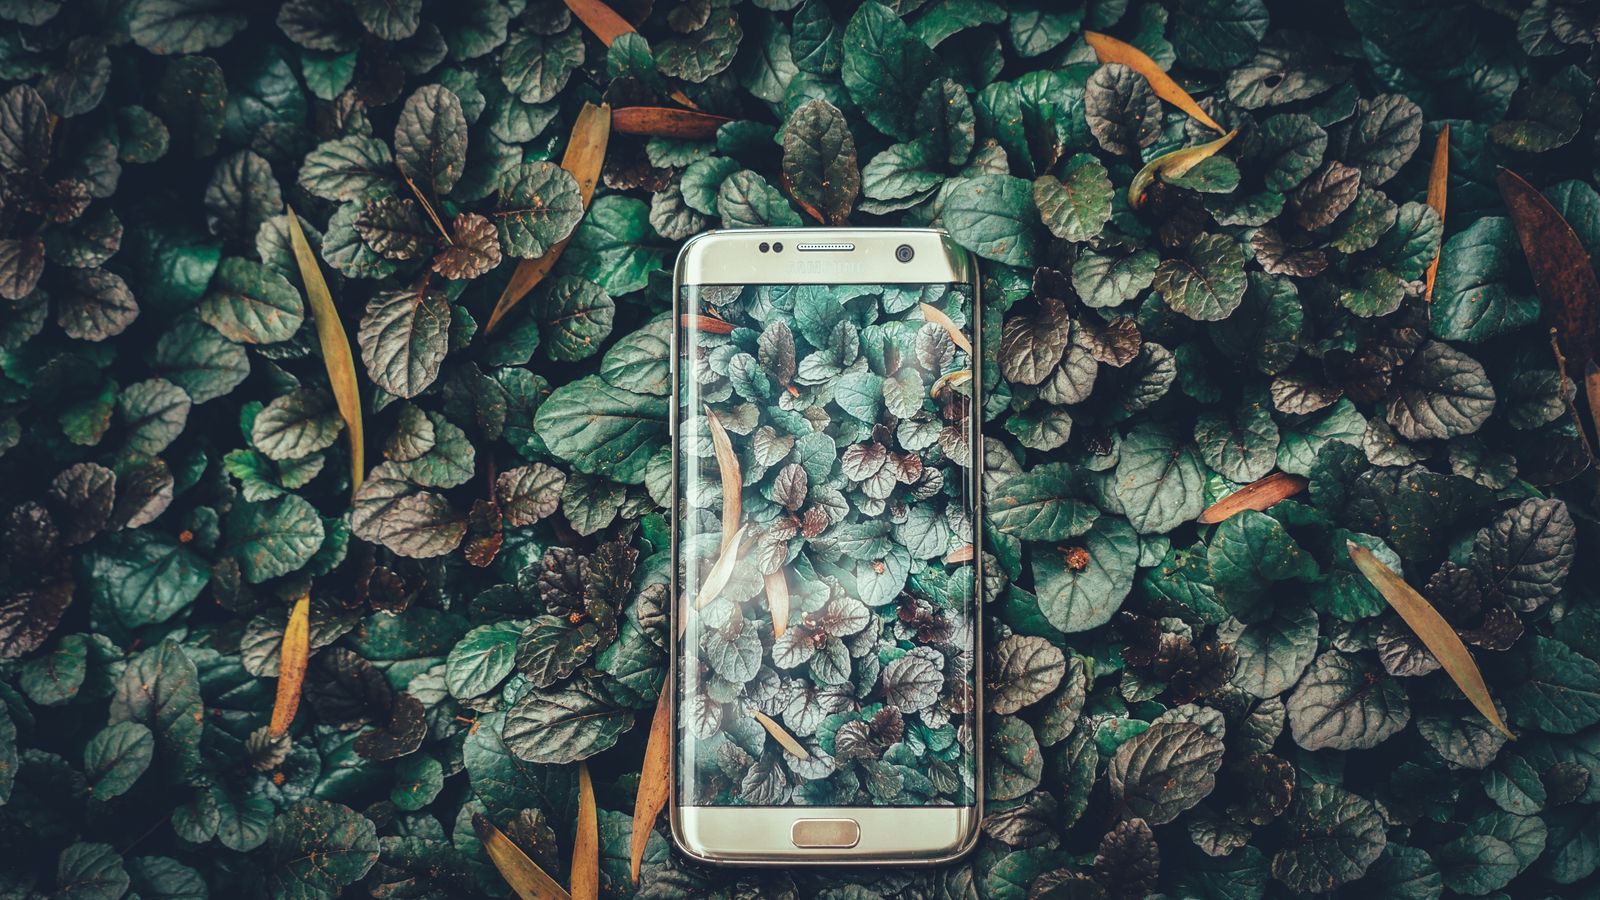 Smartphone lying in weeds with the screen showing the same weeds